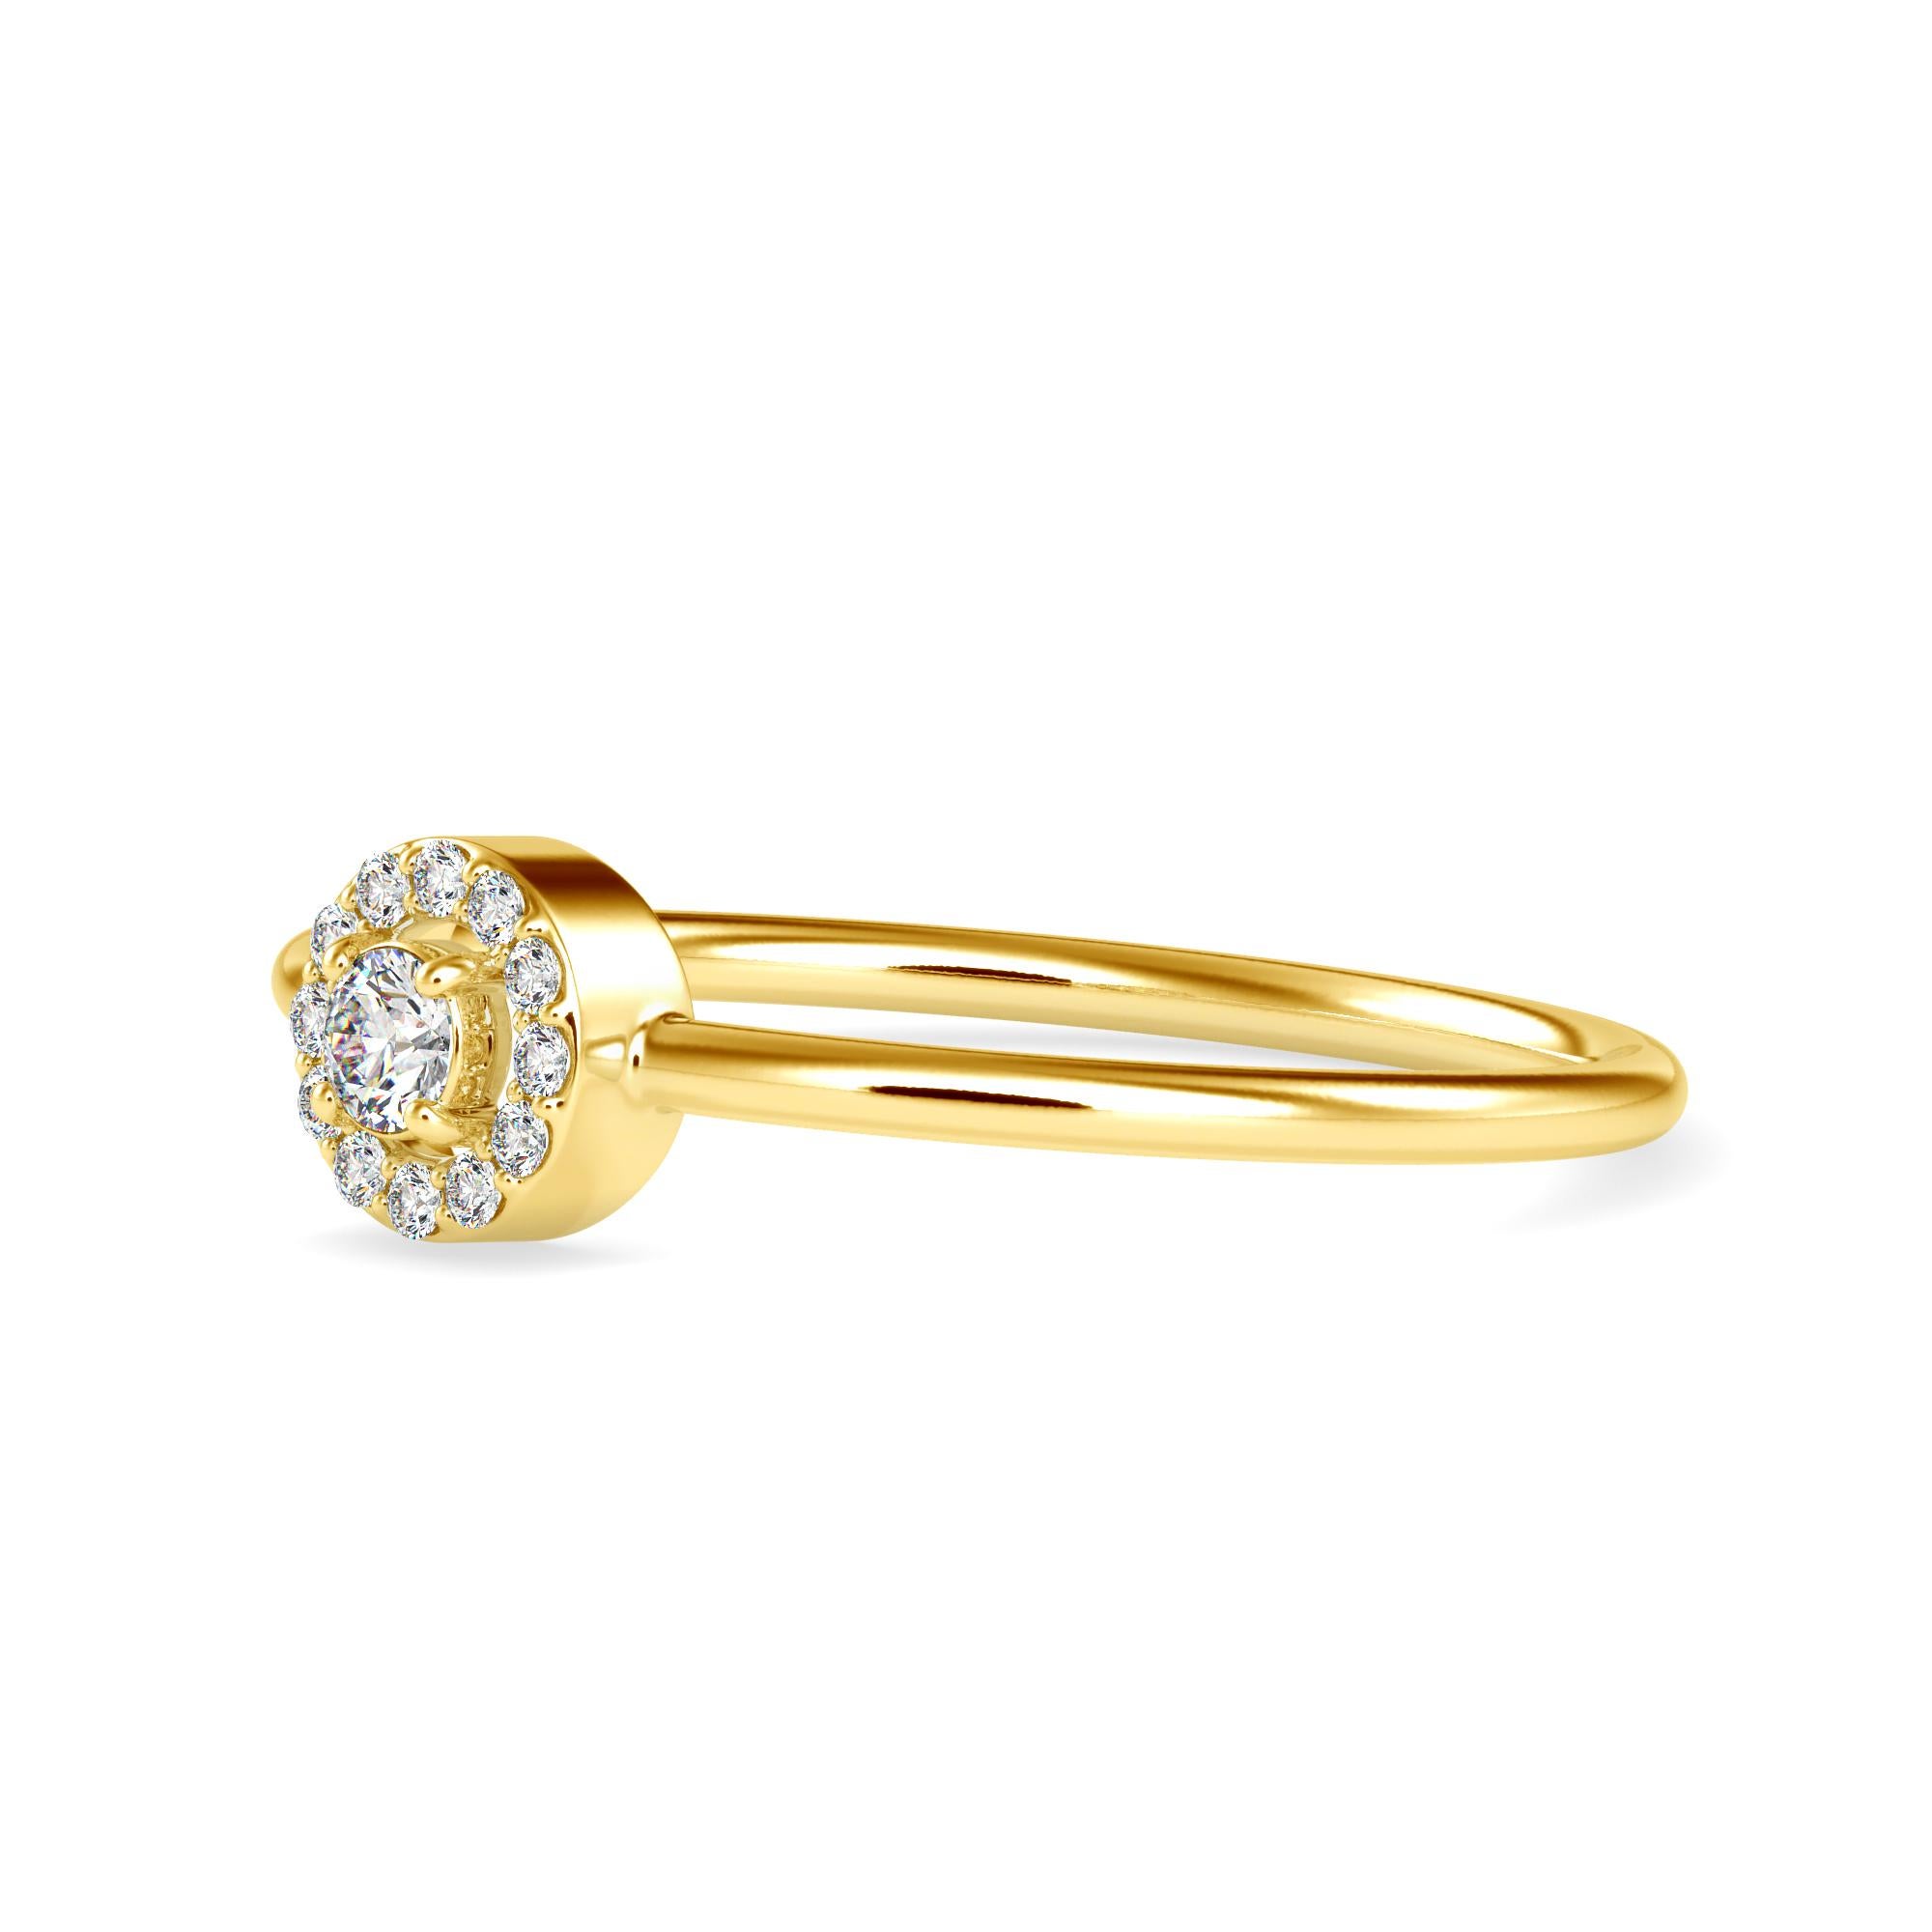 0.11 Carat Diamond 14K Yellow Gold Ring
Stamped: 14K
Total Ring Weight: 1.2 Grams 
Center Diamond Weight: 0.06 Carat (F-G Color, VS2-SI1 Clarity)2.5 Millimeters 
Side Diamonds Weight: 0.045 Carat (F-G Color, VS2-SI1 Clarity ), 1.0